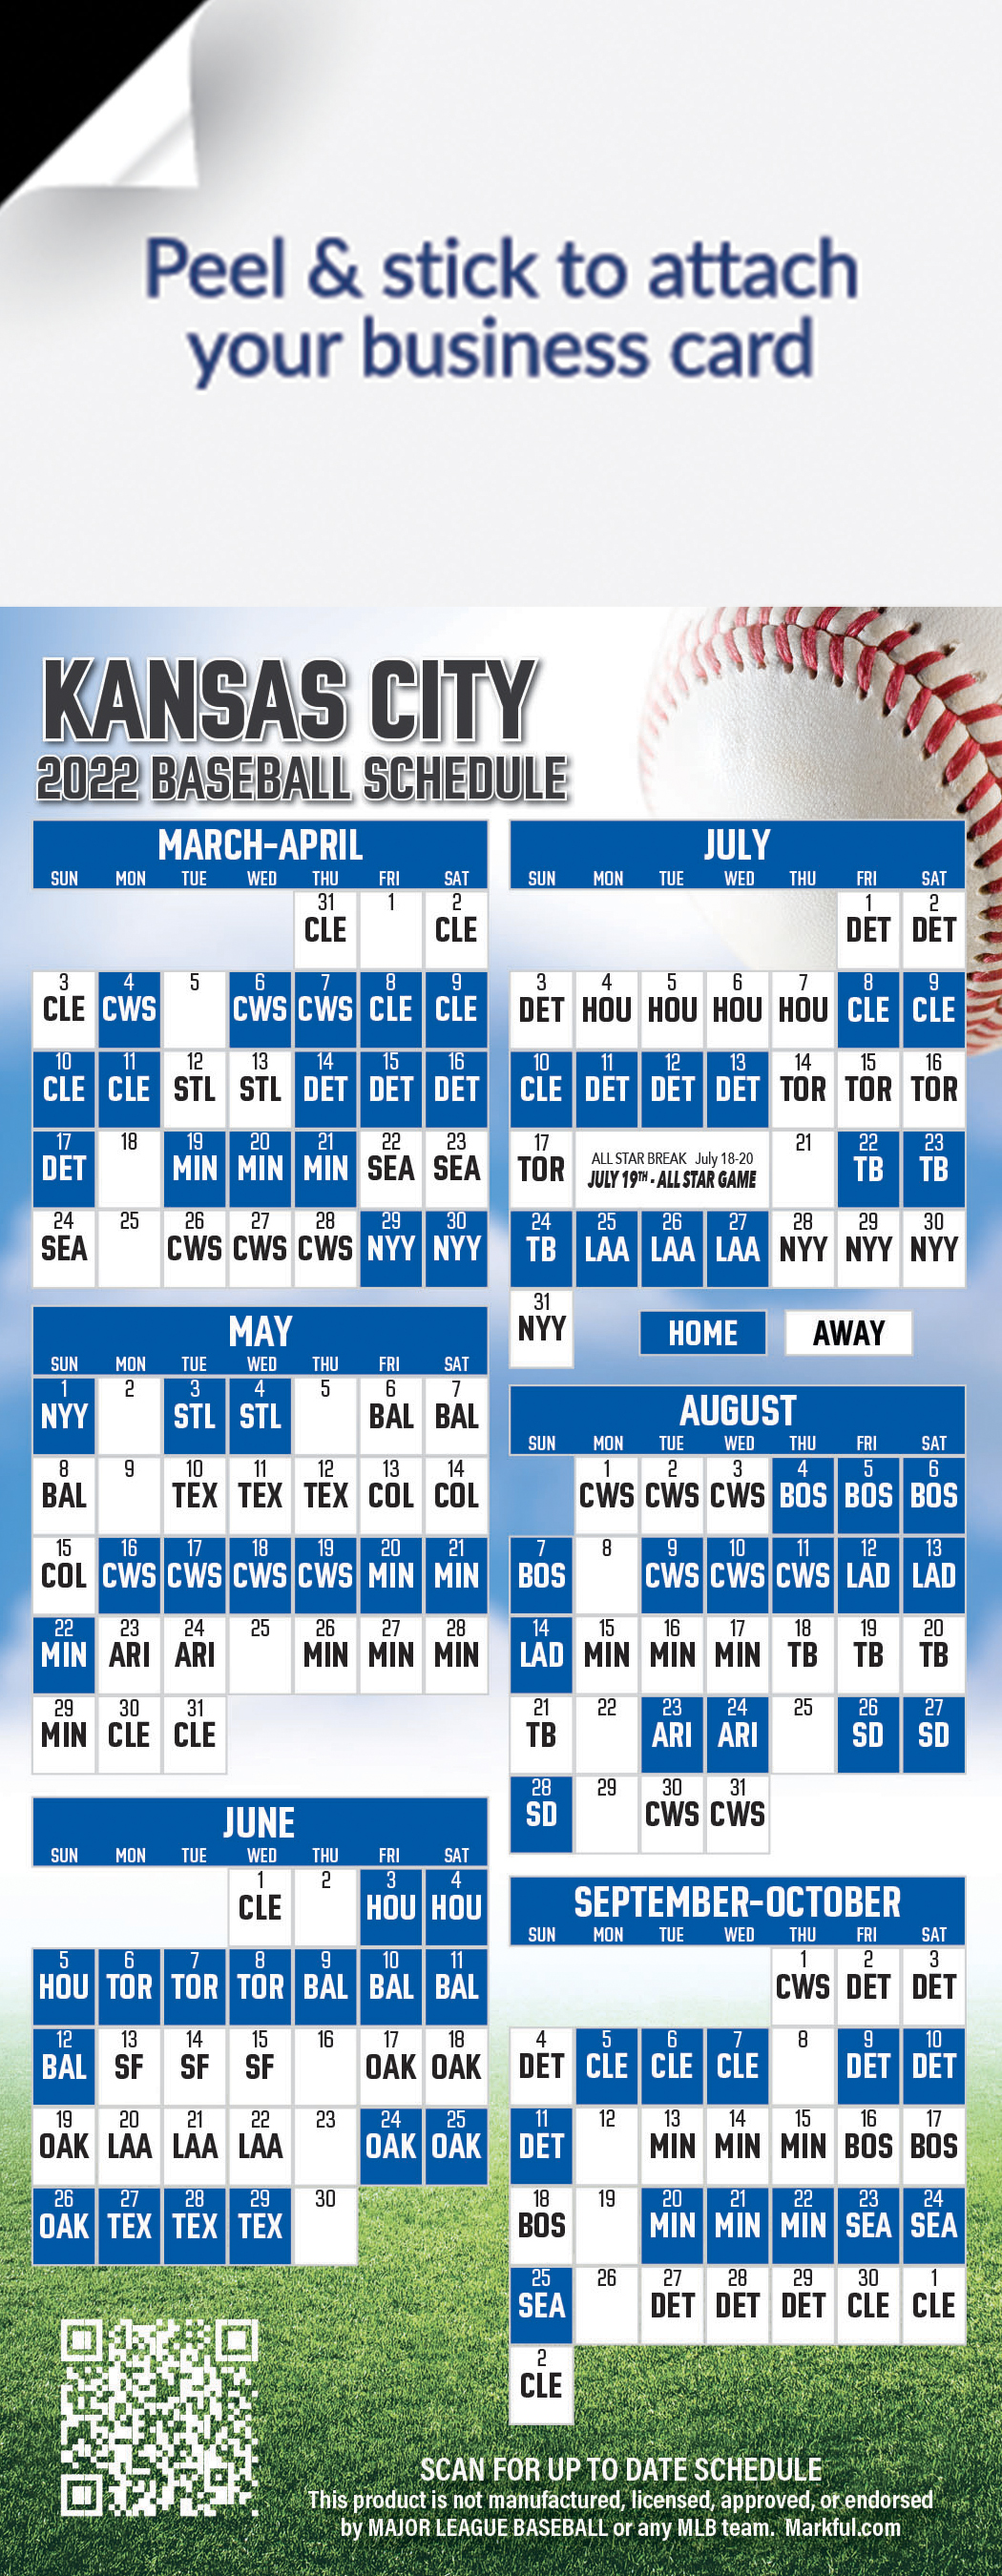 Kc Royals Schedule 2022 2022 Kansas City Royals Schedule Magnets & Magnetic Schedules | Markful